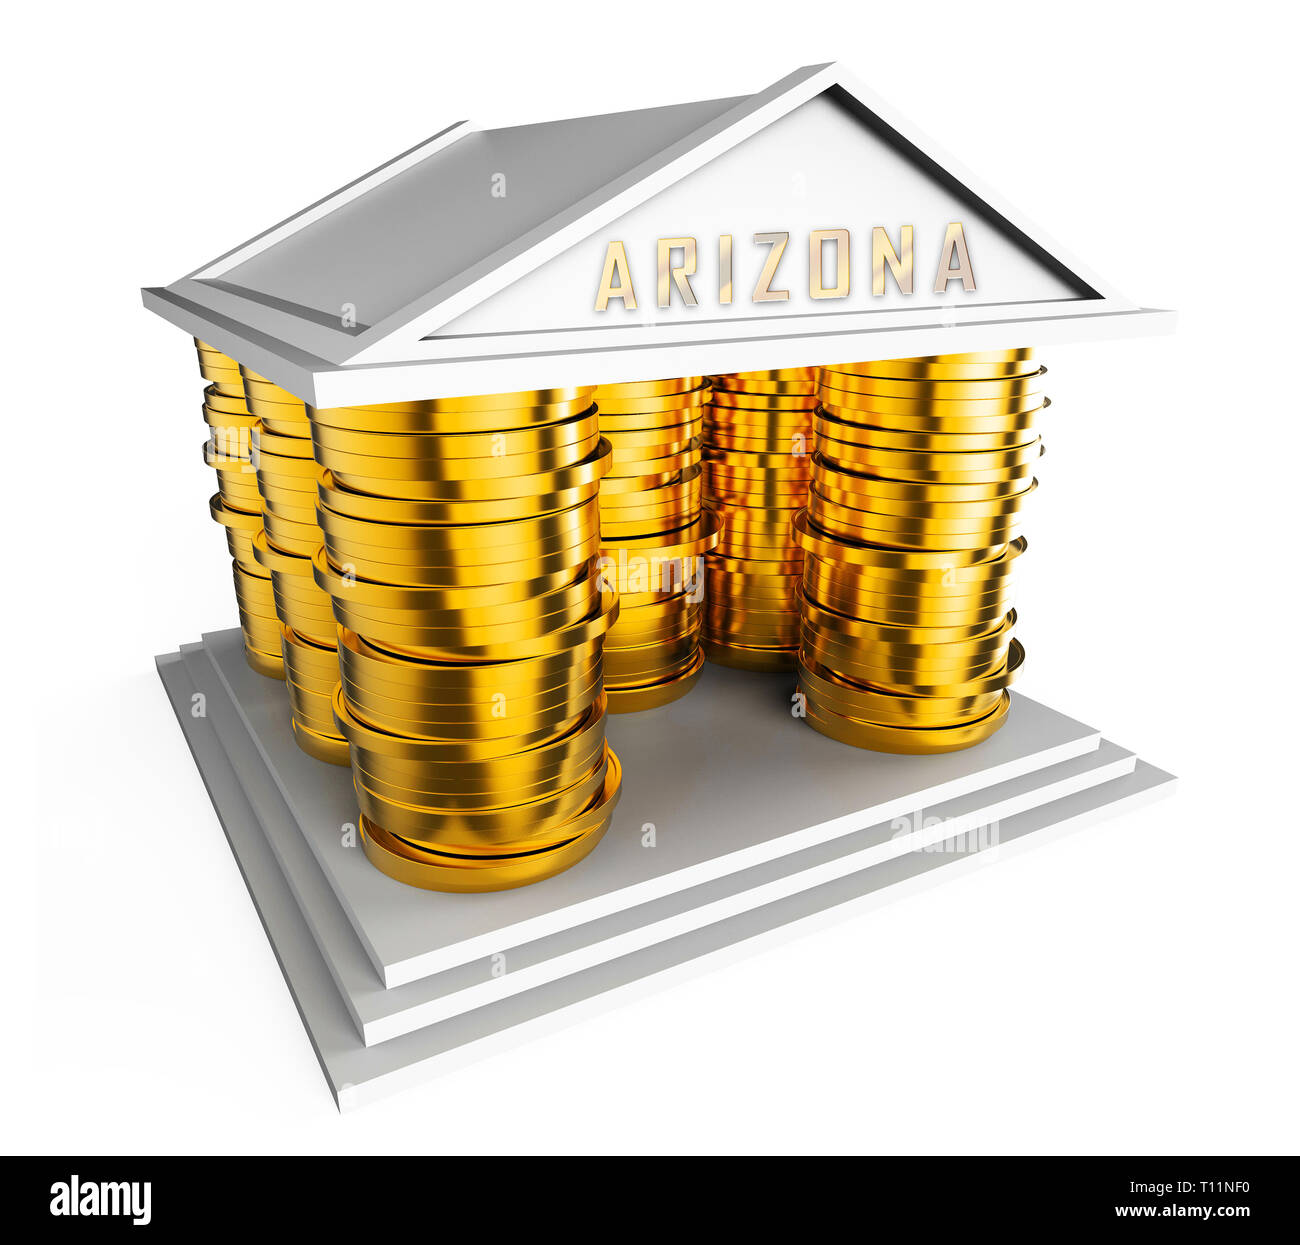 Arizona Luxury Homes Meaning High Class Accomodation With Expensive ...